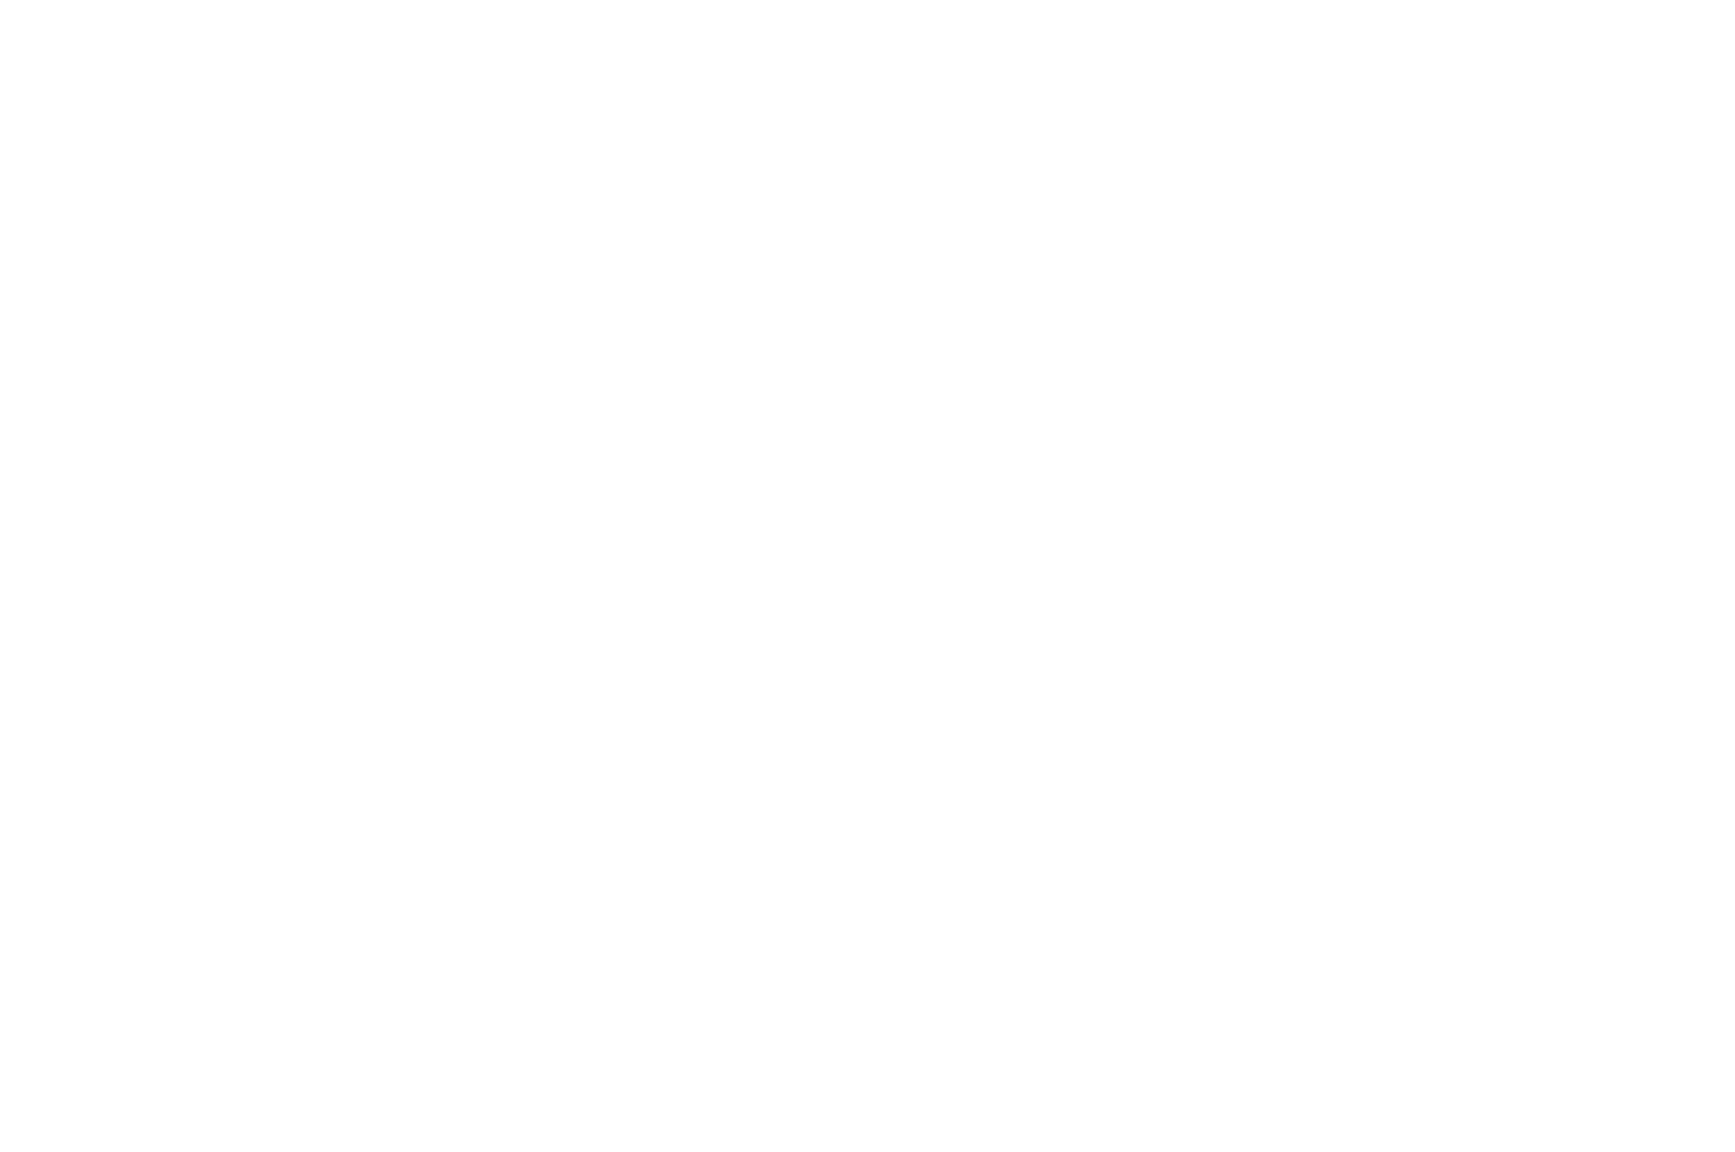 OFFICIAL SELECTION - Skiptown Playhouse International Film Festival - 2021.png